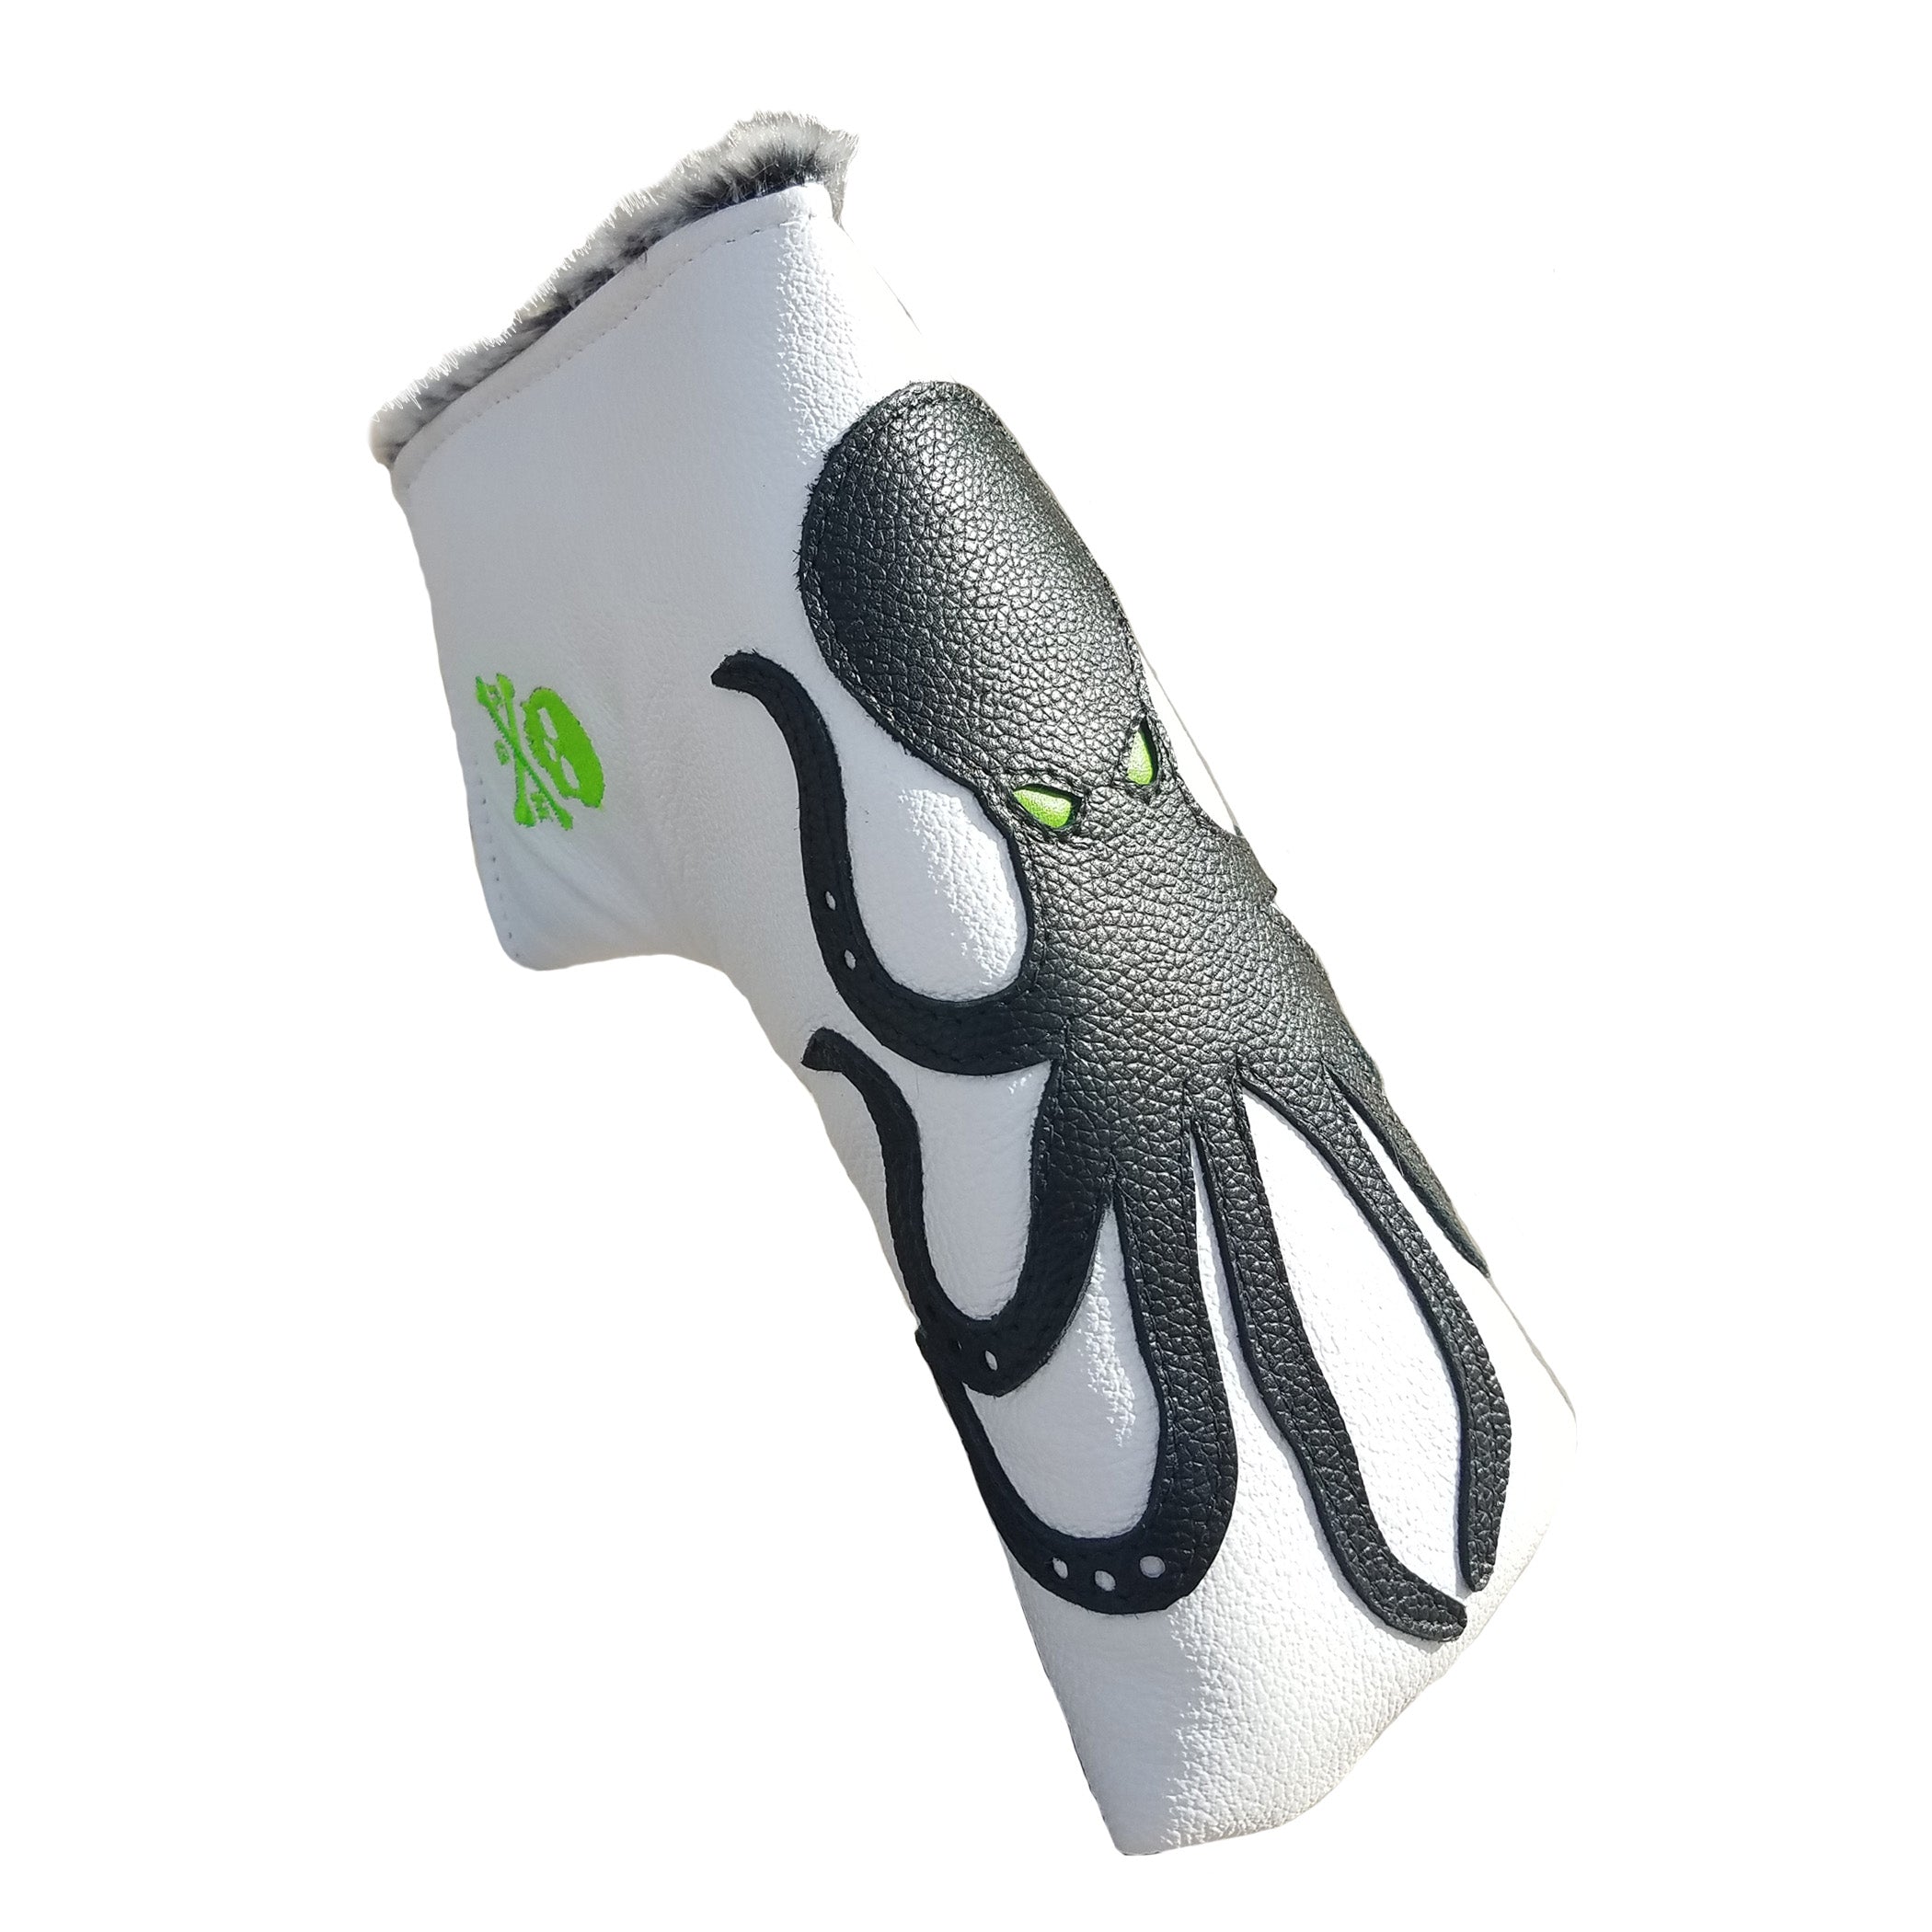 The Giant Squid Putter Cover - Robert Mark Golf